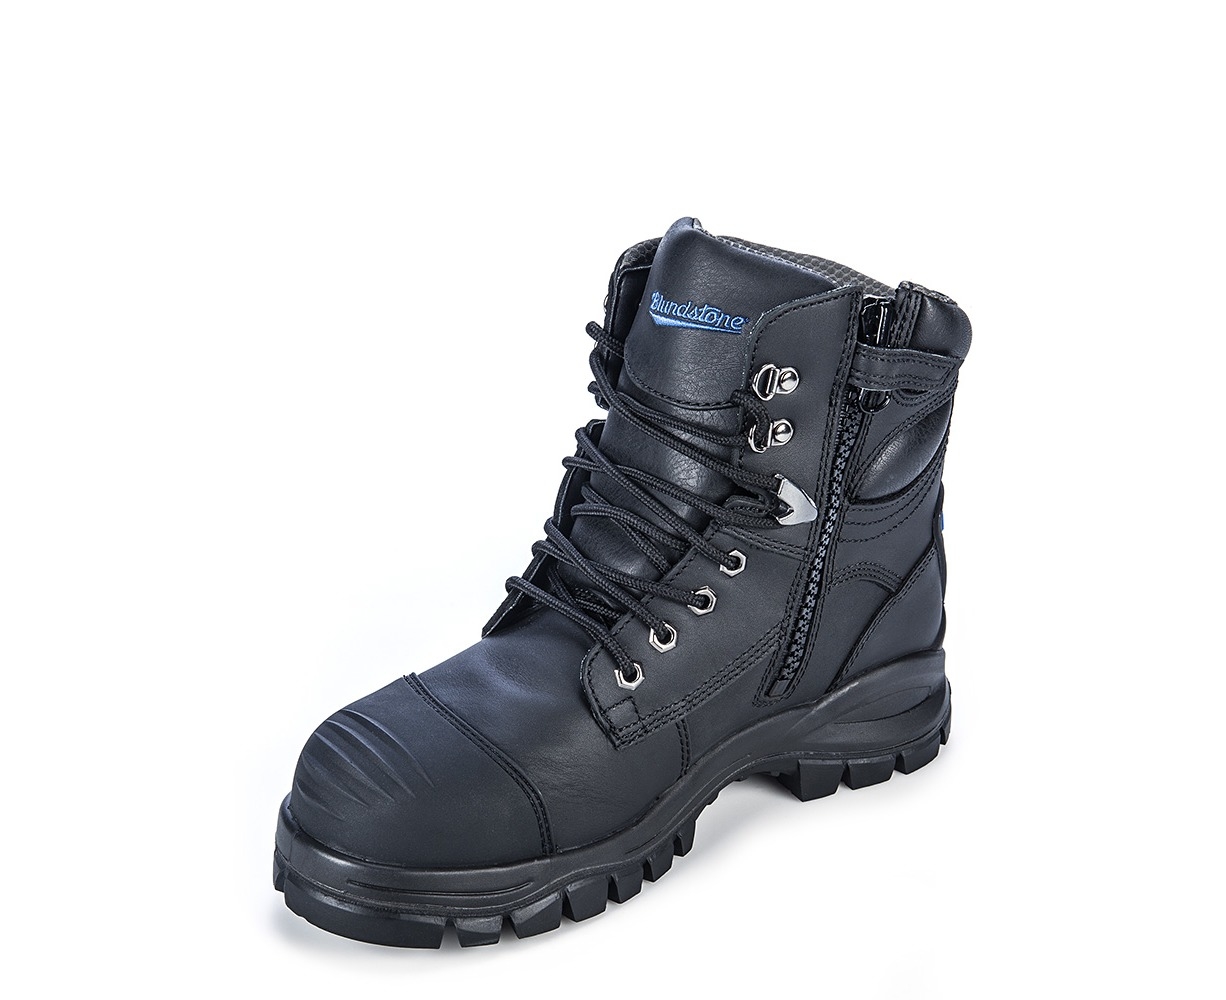 blundstone boots cyber monday